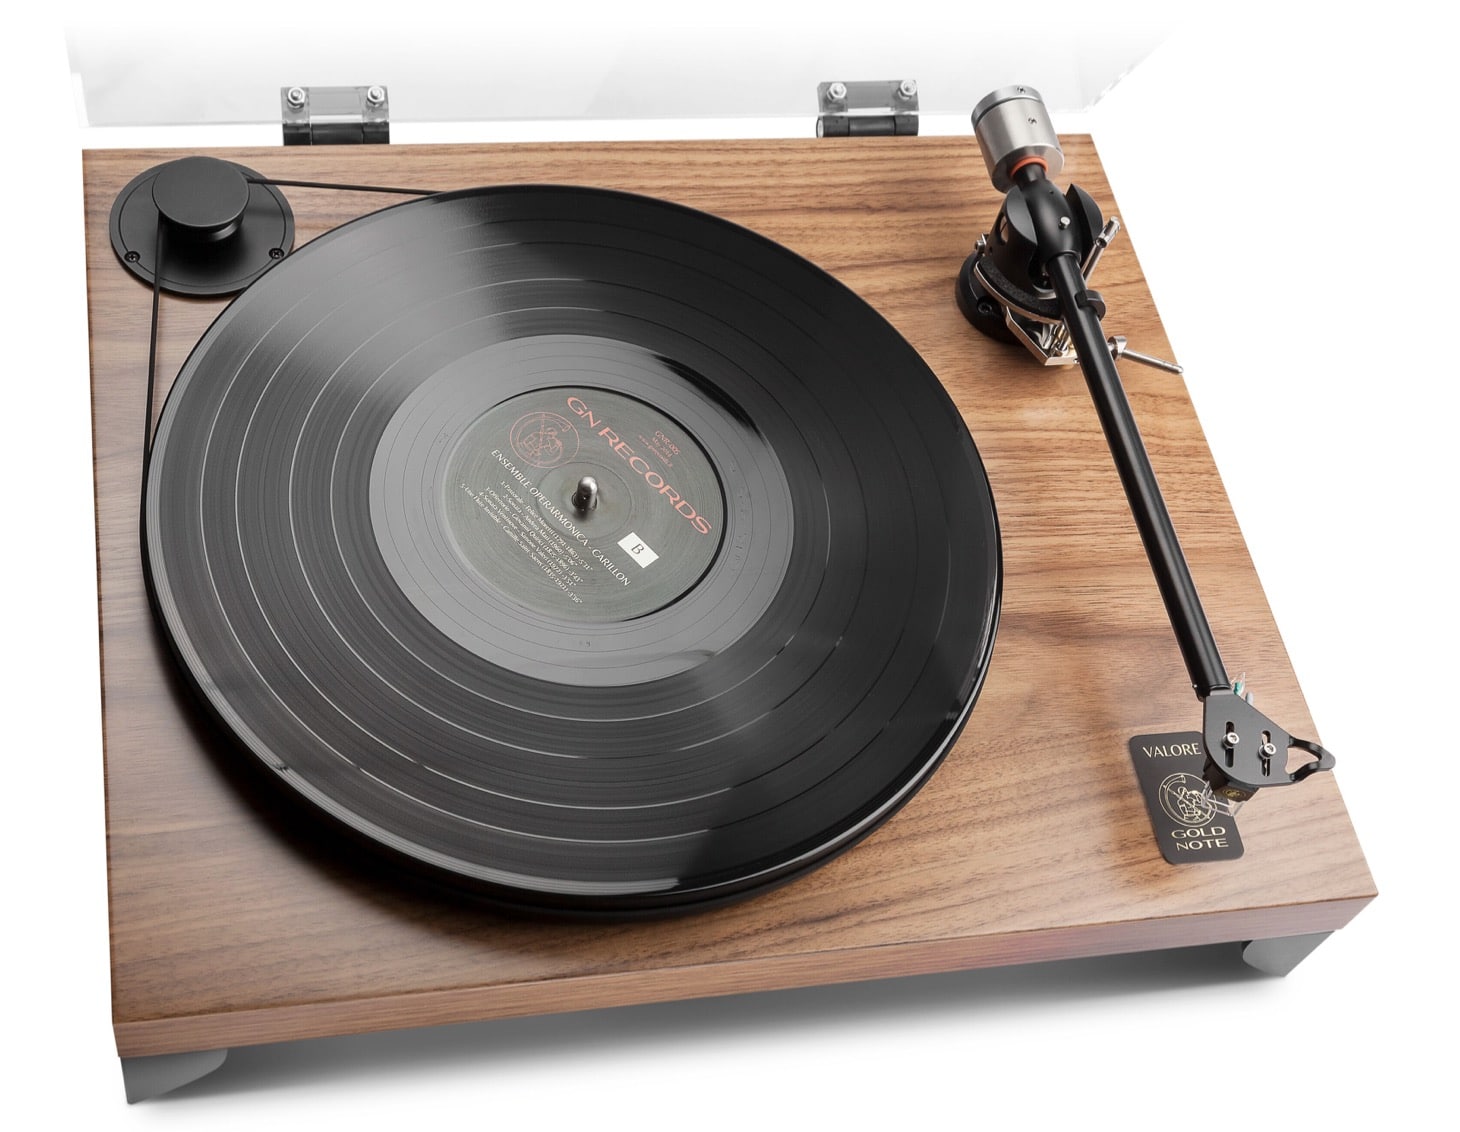 Valore 425 Turntable From Gold Note